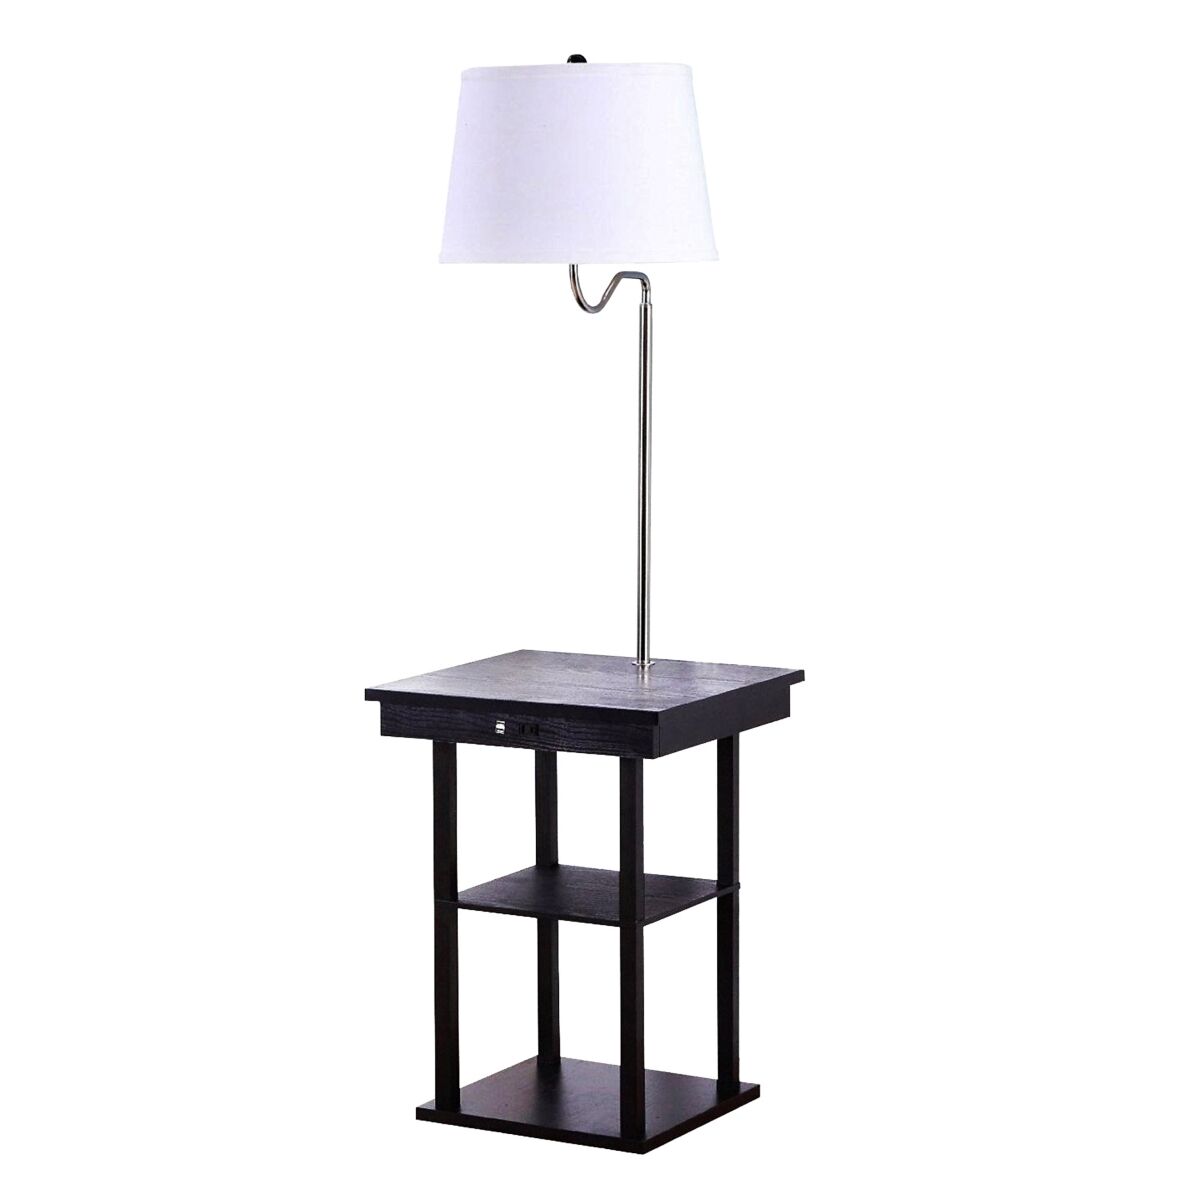 Brightech Madison Table & Led Lamp Combo with Usb Port and Outlet - Classic Black/ White